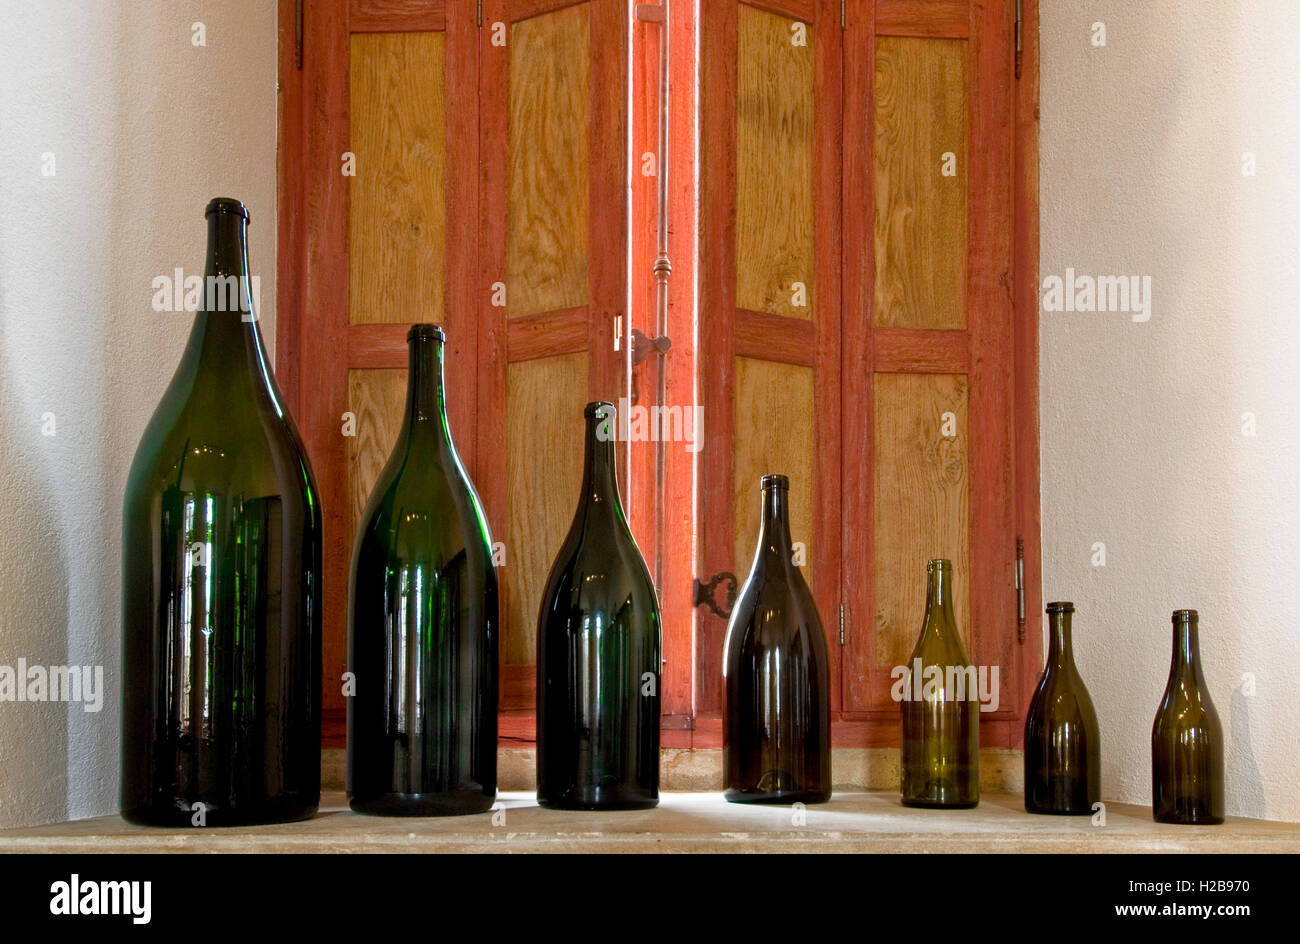 Wine bottle bottles sizes variety line on display in the tasting room of Chateau de Pommard Cote d'Or Burgundy France Stock Photo